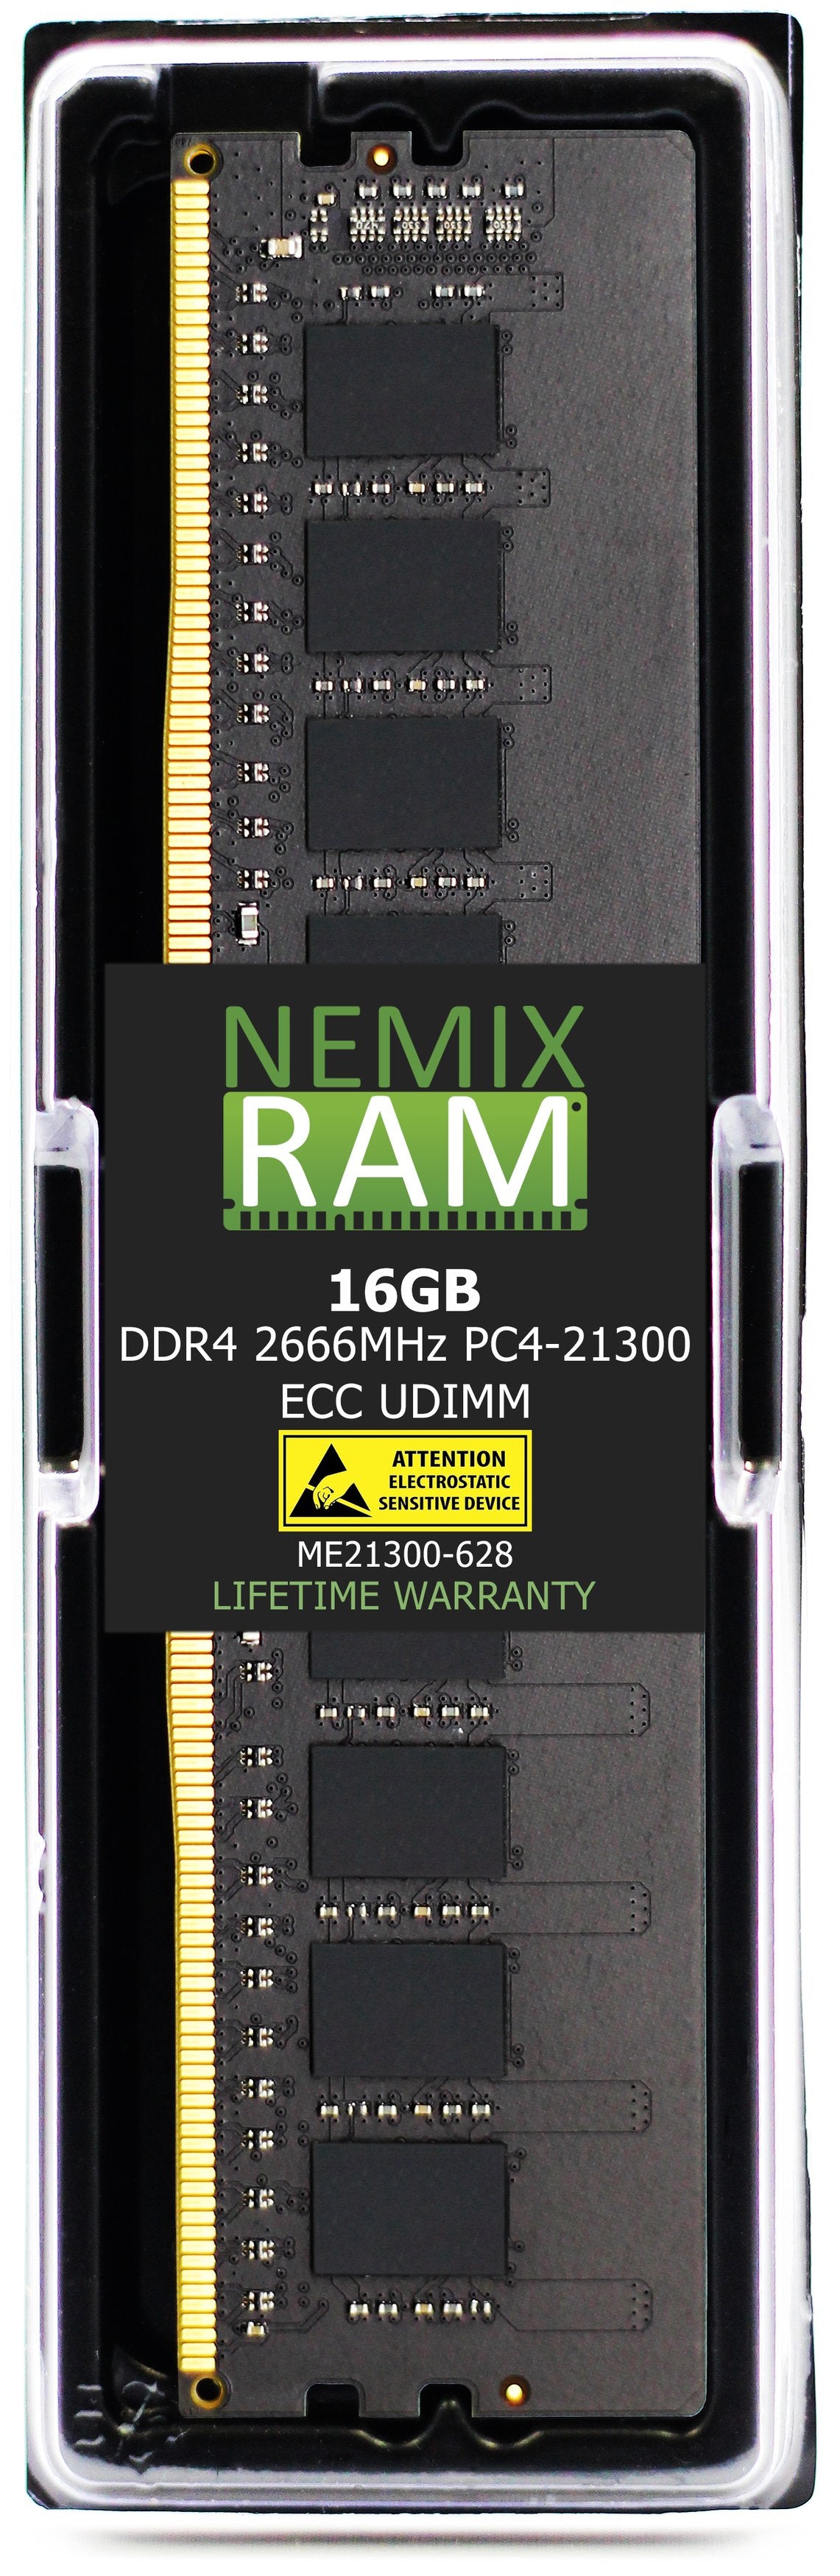 DDR4 2666MHZ PC4-21300 ECC UDIMM Compatible with Synology RackStation RS3621RPxs